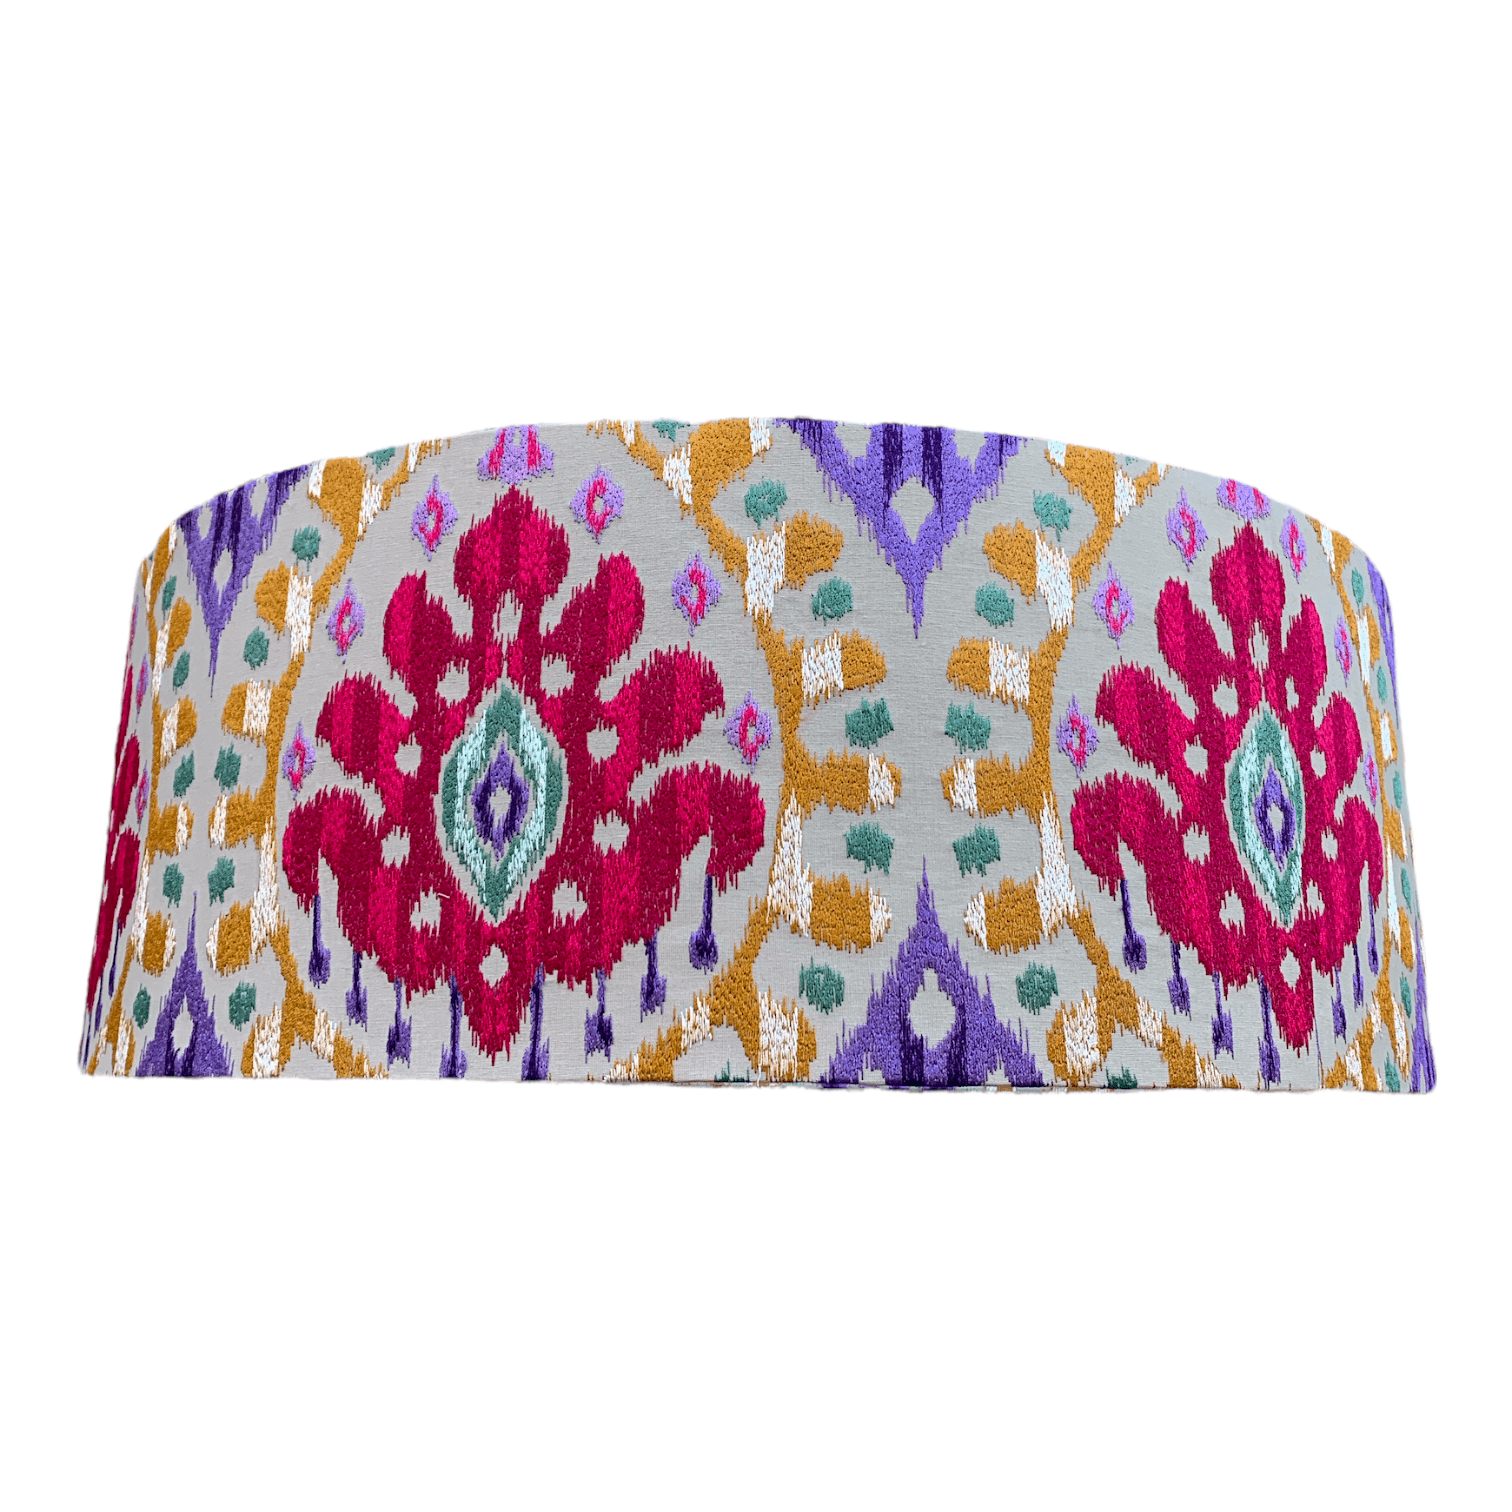 Embroidered Ikat 28" Drum Lampshade